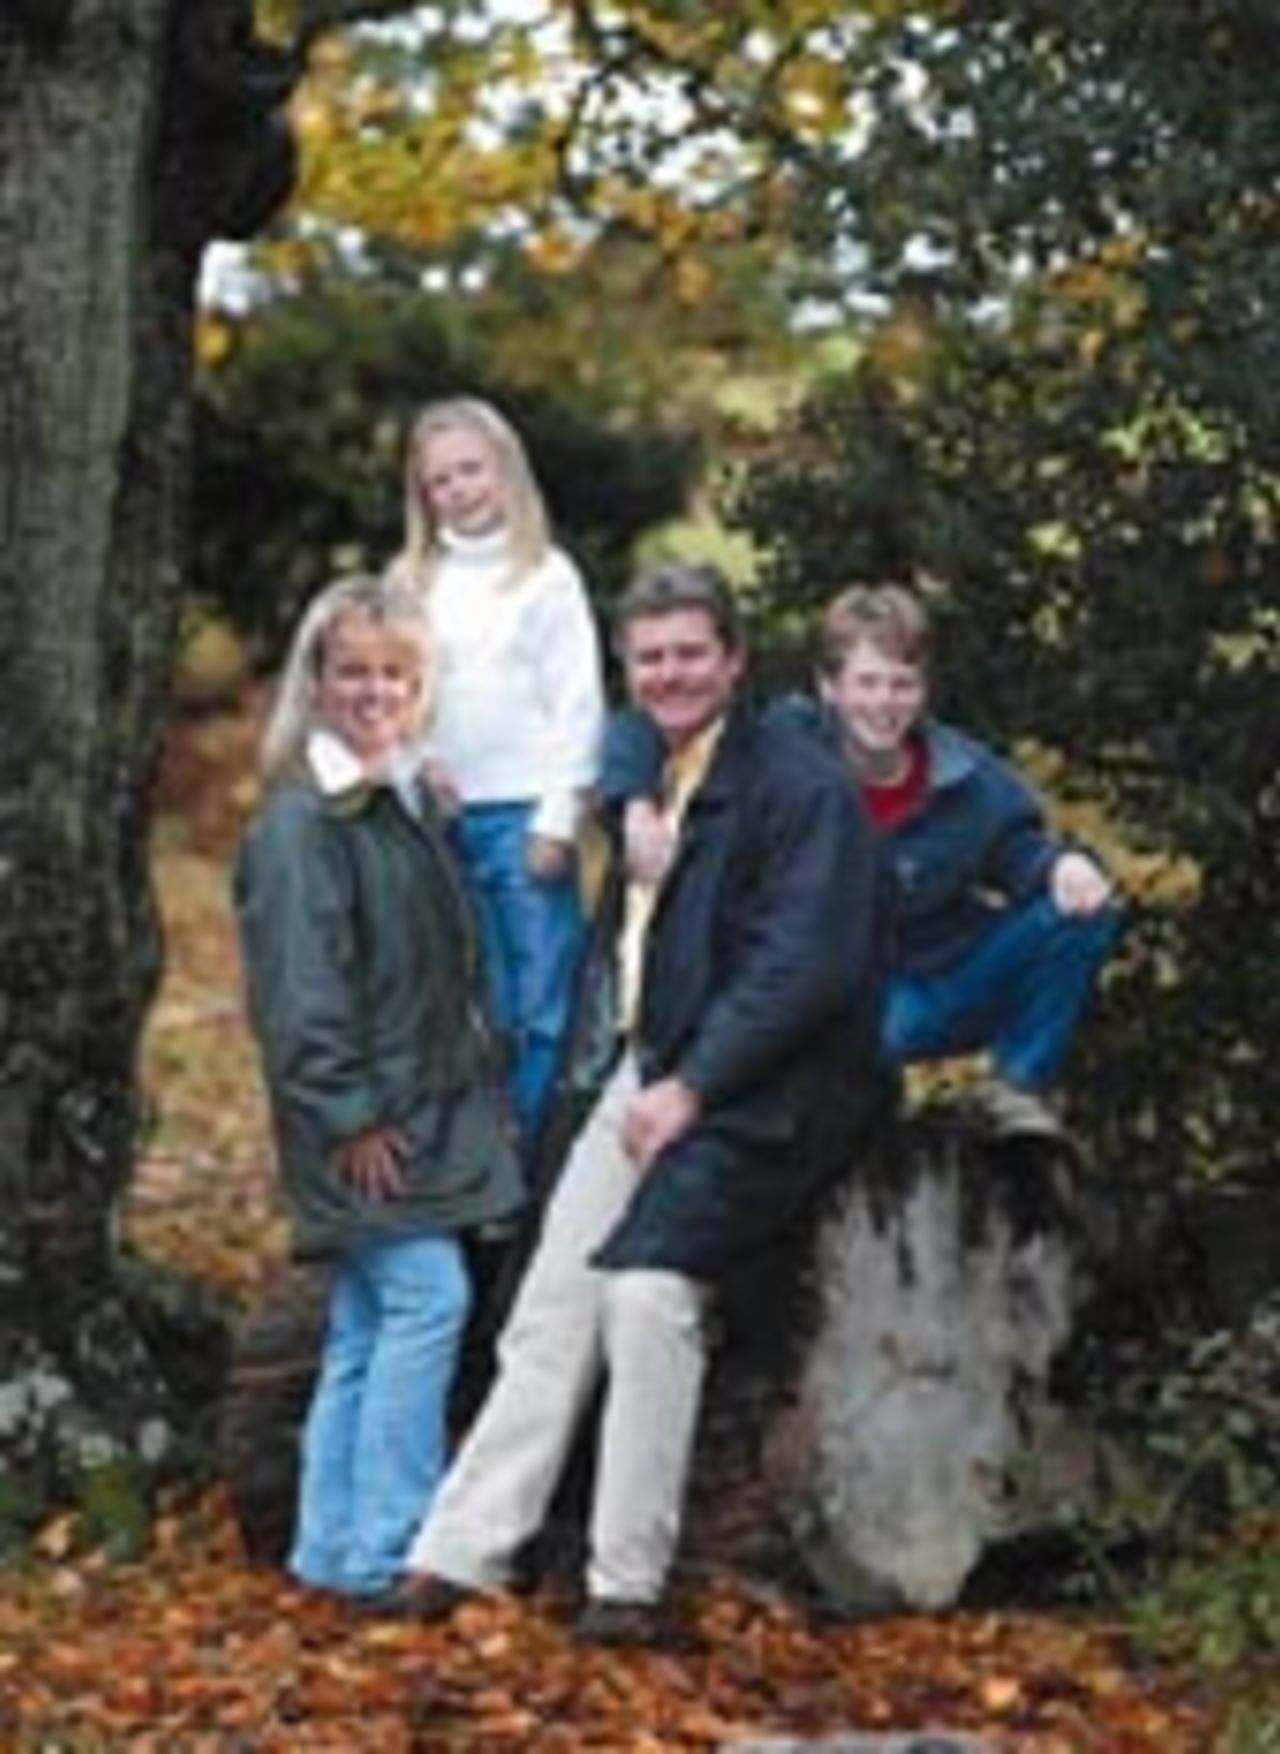 Robin Smith with wife Kathy, son Harrison and daughter Margot.